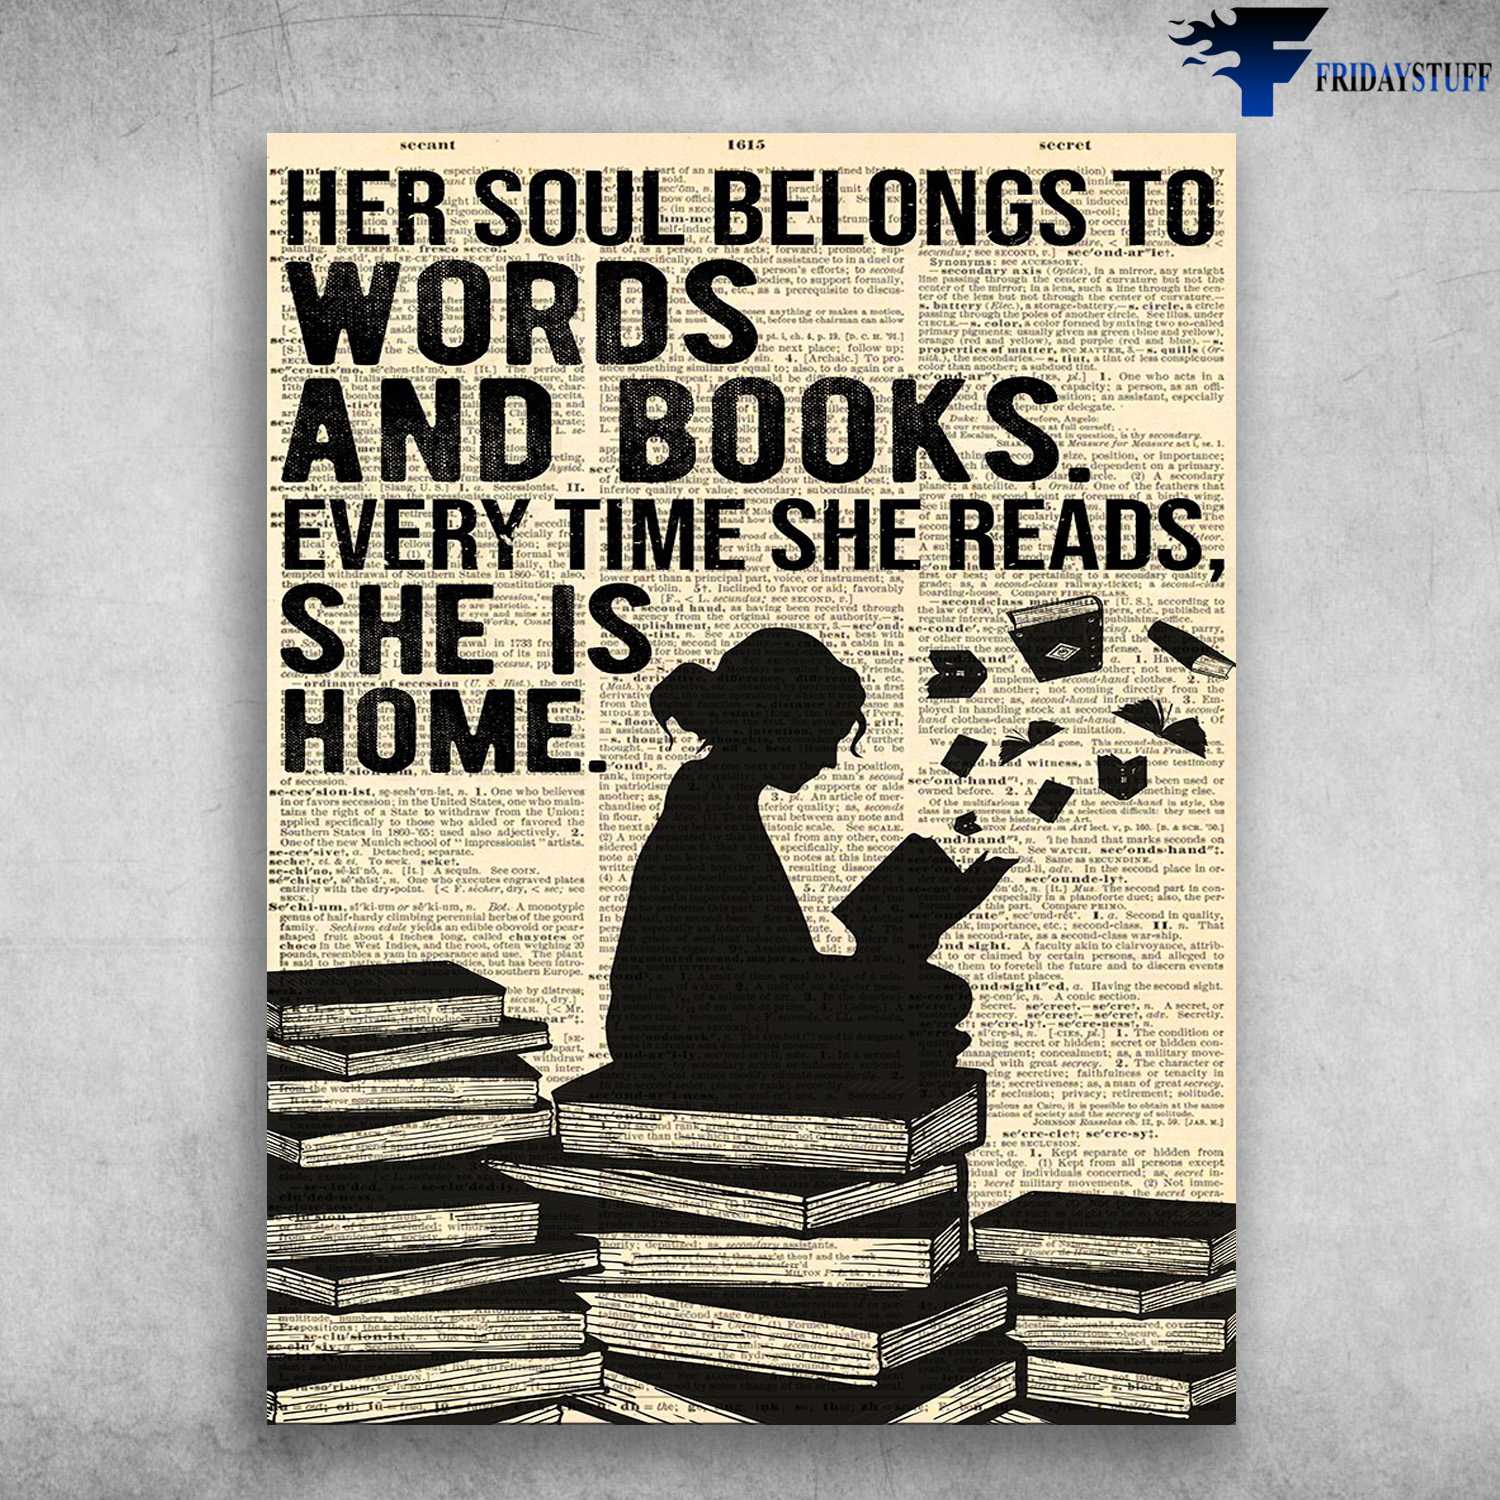 Book Lover, Reader Poster - Her Soull Belongs To, Works And Books, Everytime She Reads, She Is Home